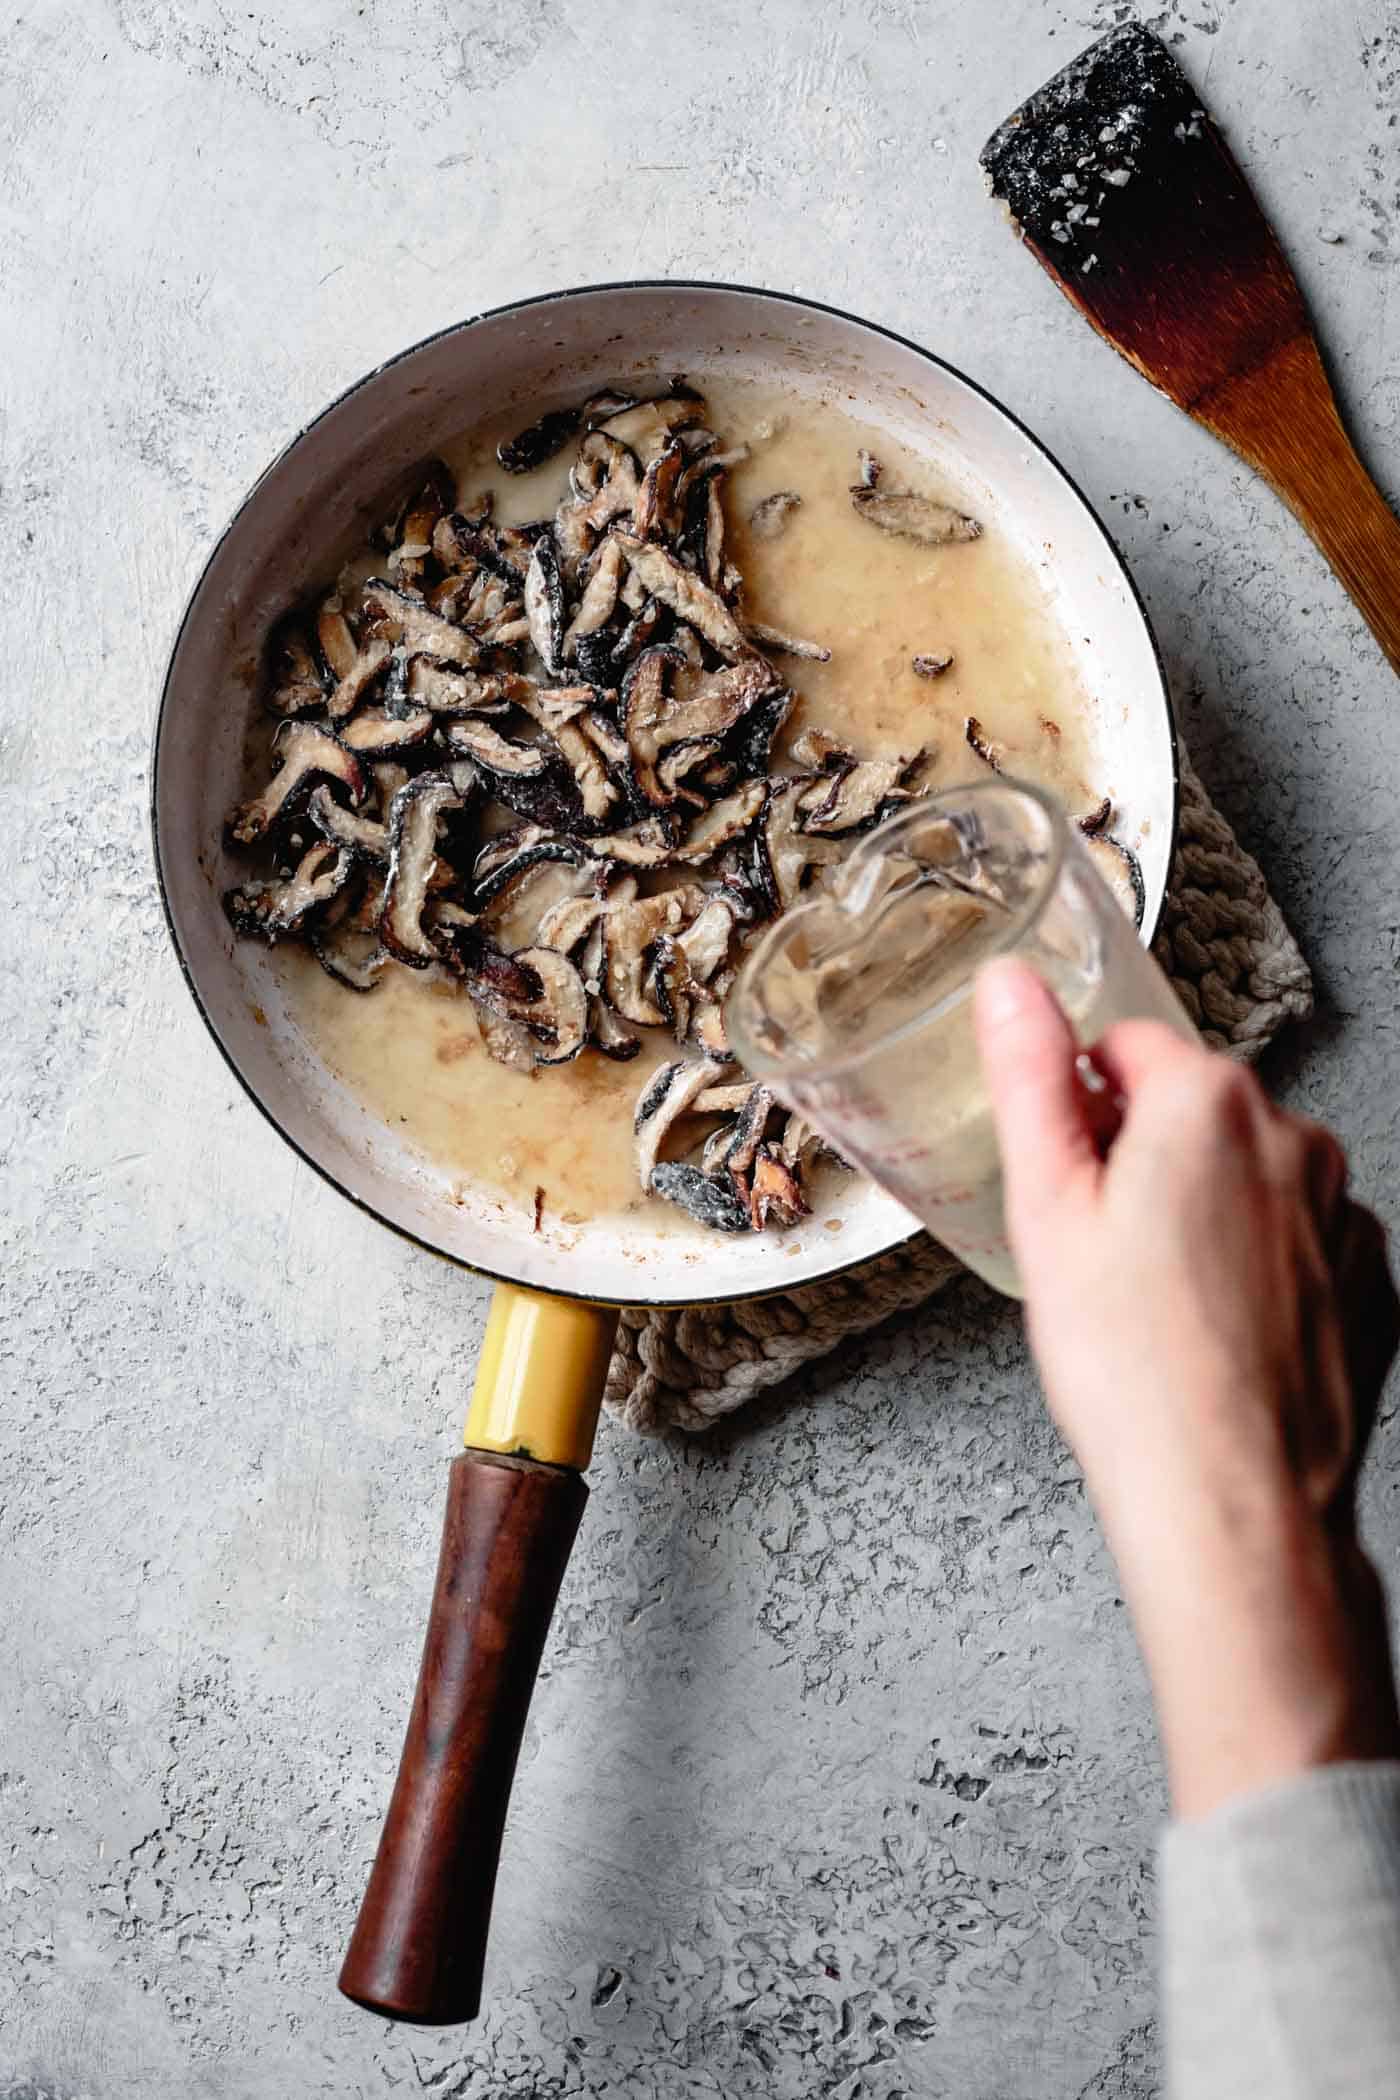 How to make mushroom gravy: adding vegetable stock to the mushrooms in the pan